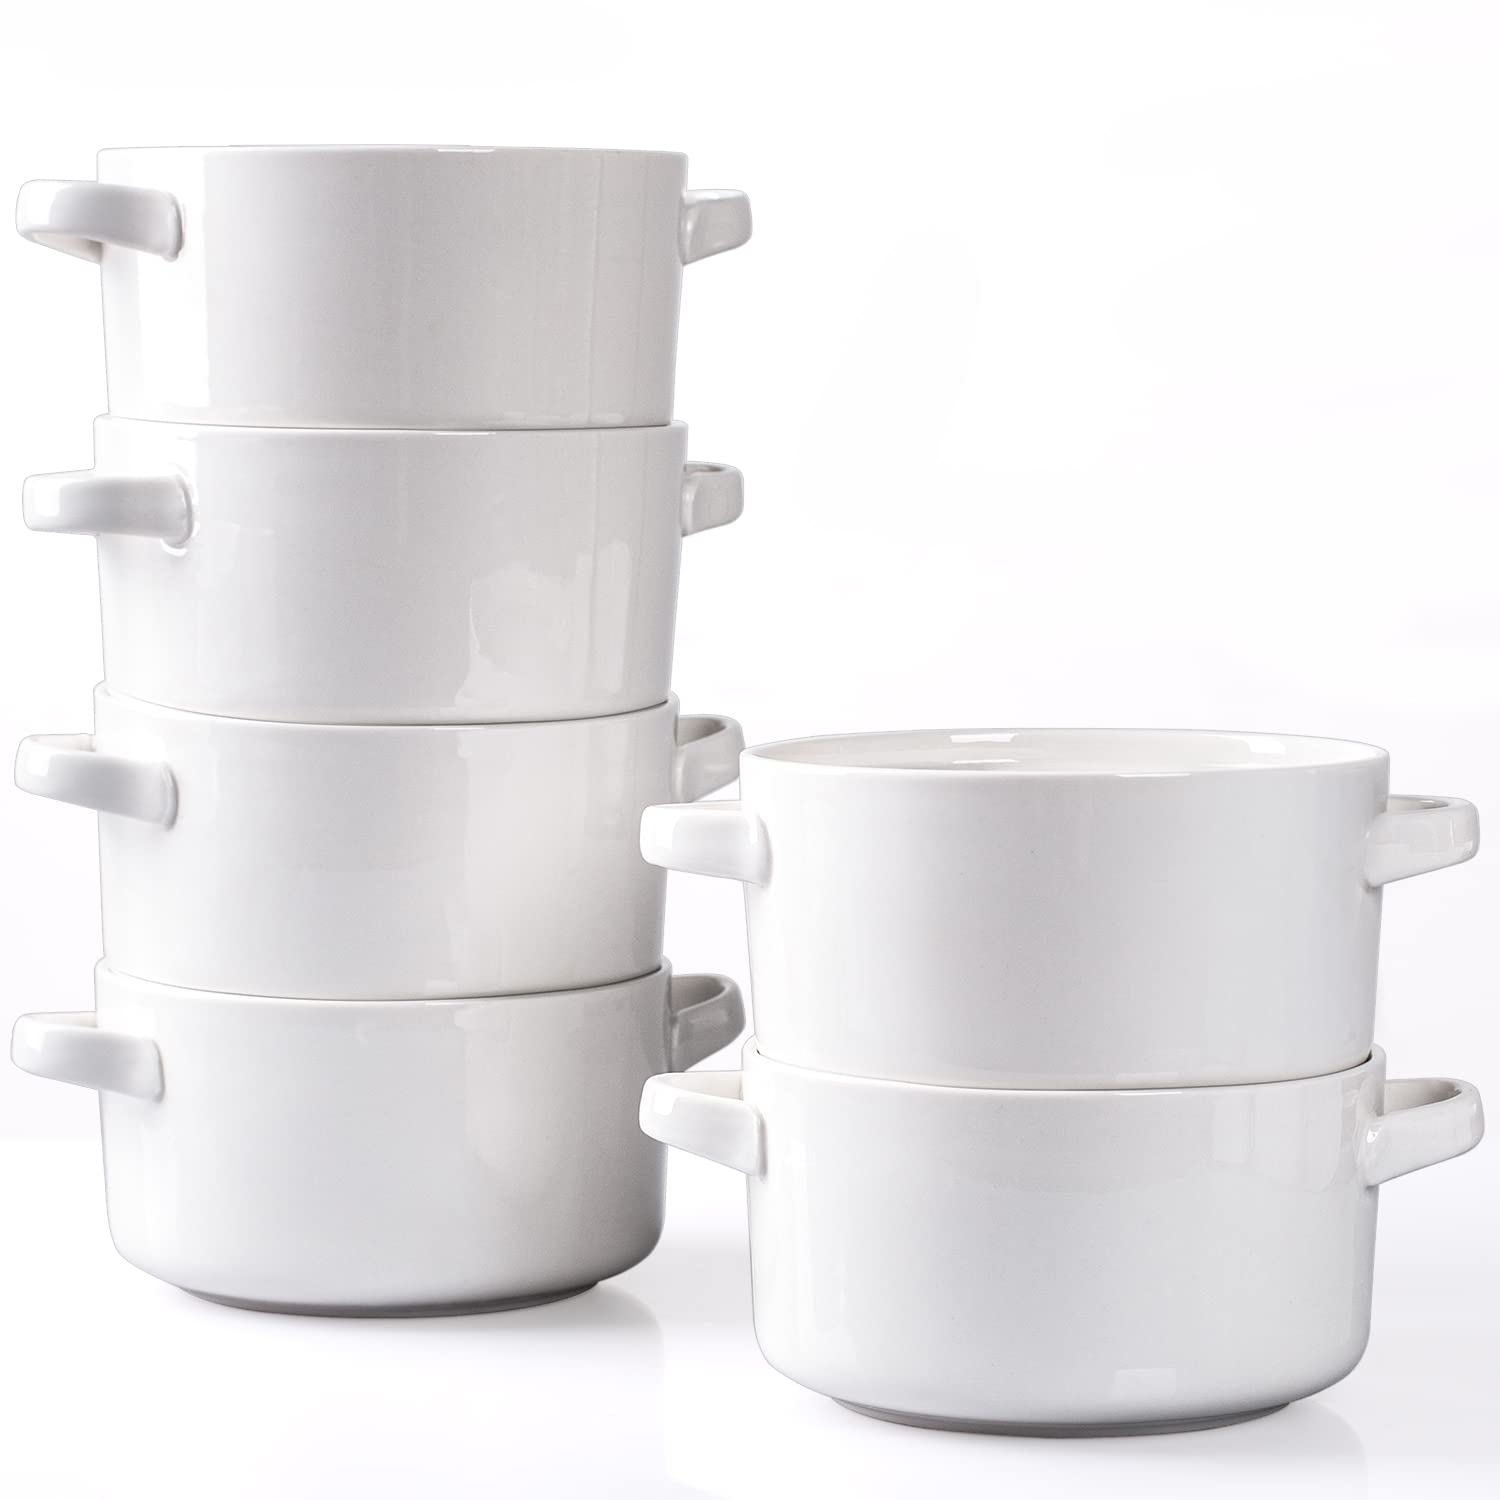 DELLING 6 Pack Soup Bowls with Handles, 24 Oz Large Serving Soup Bowl Set, Ceramic Soup Crocks for French Onion Soup, Cereal, Chilli, Stew, Microwave and Oven Safe, White